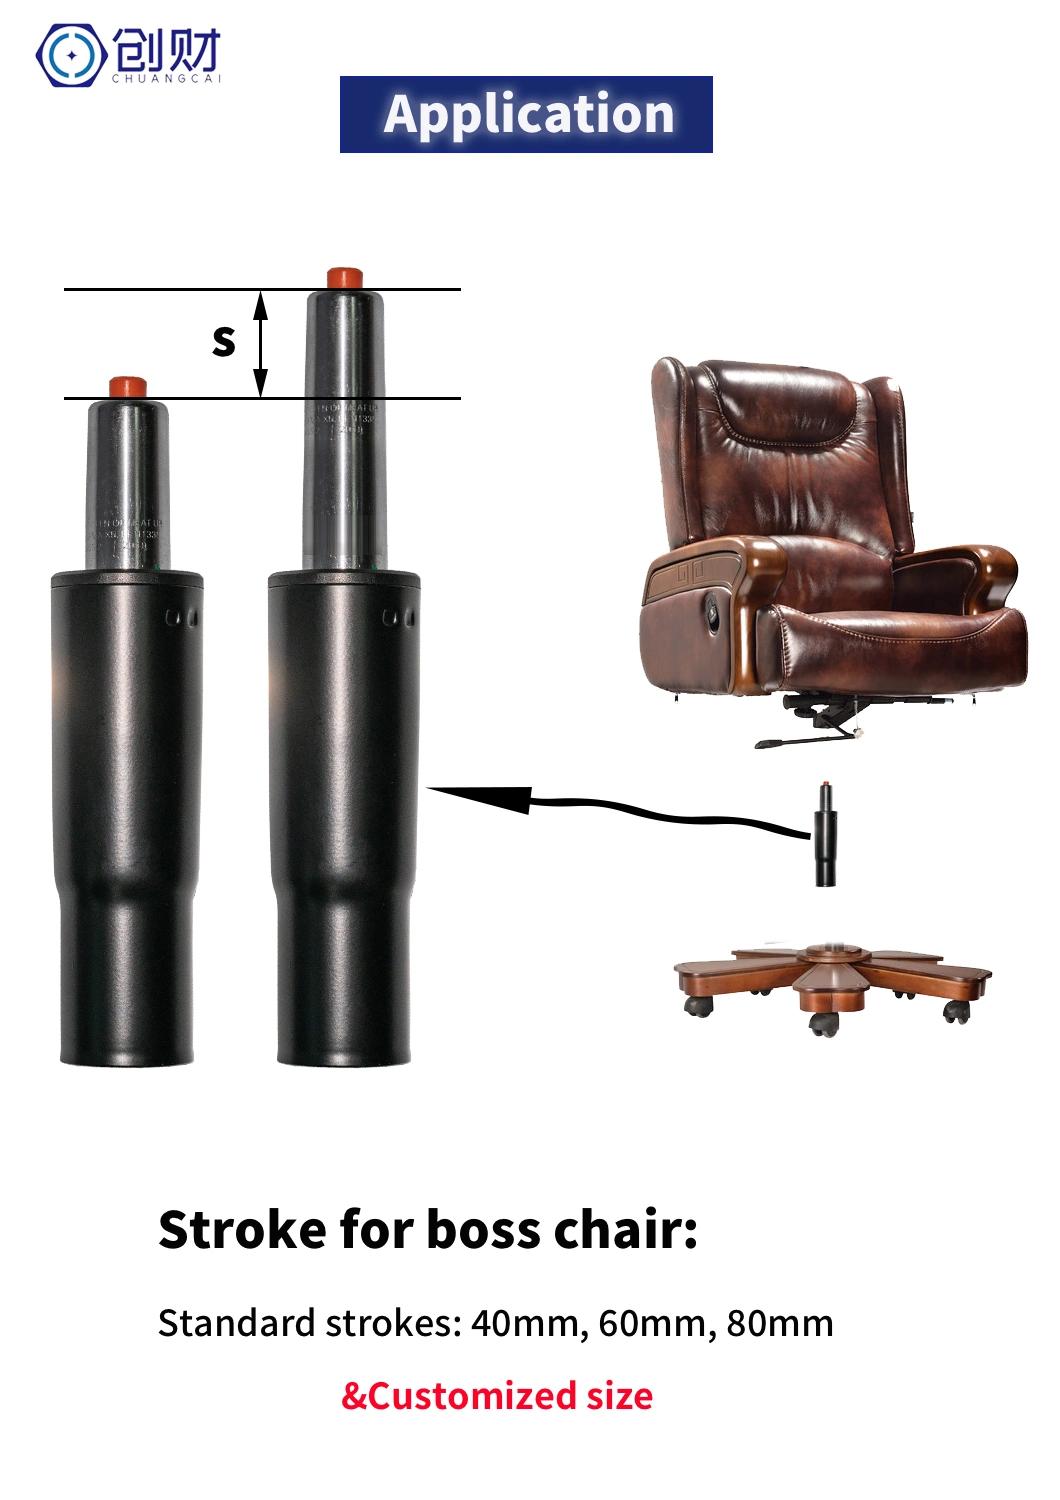 Interchangeable Cylindrical Gas Spring Office Chair